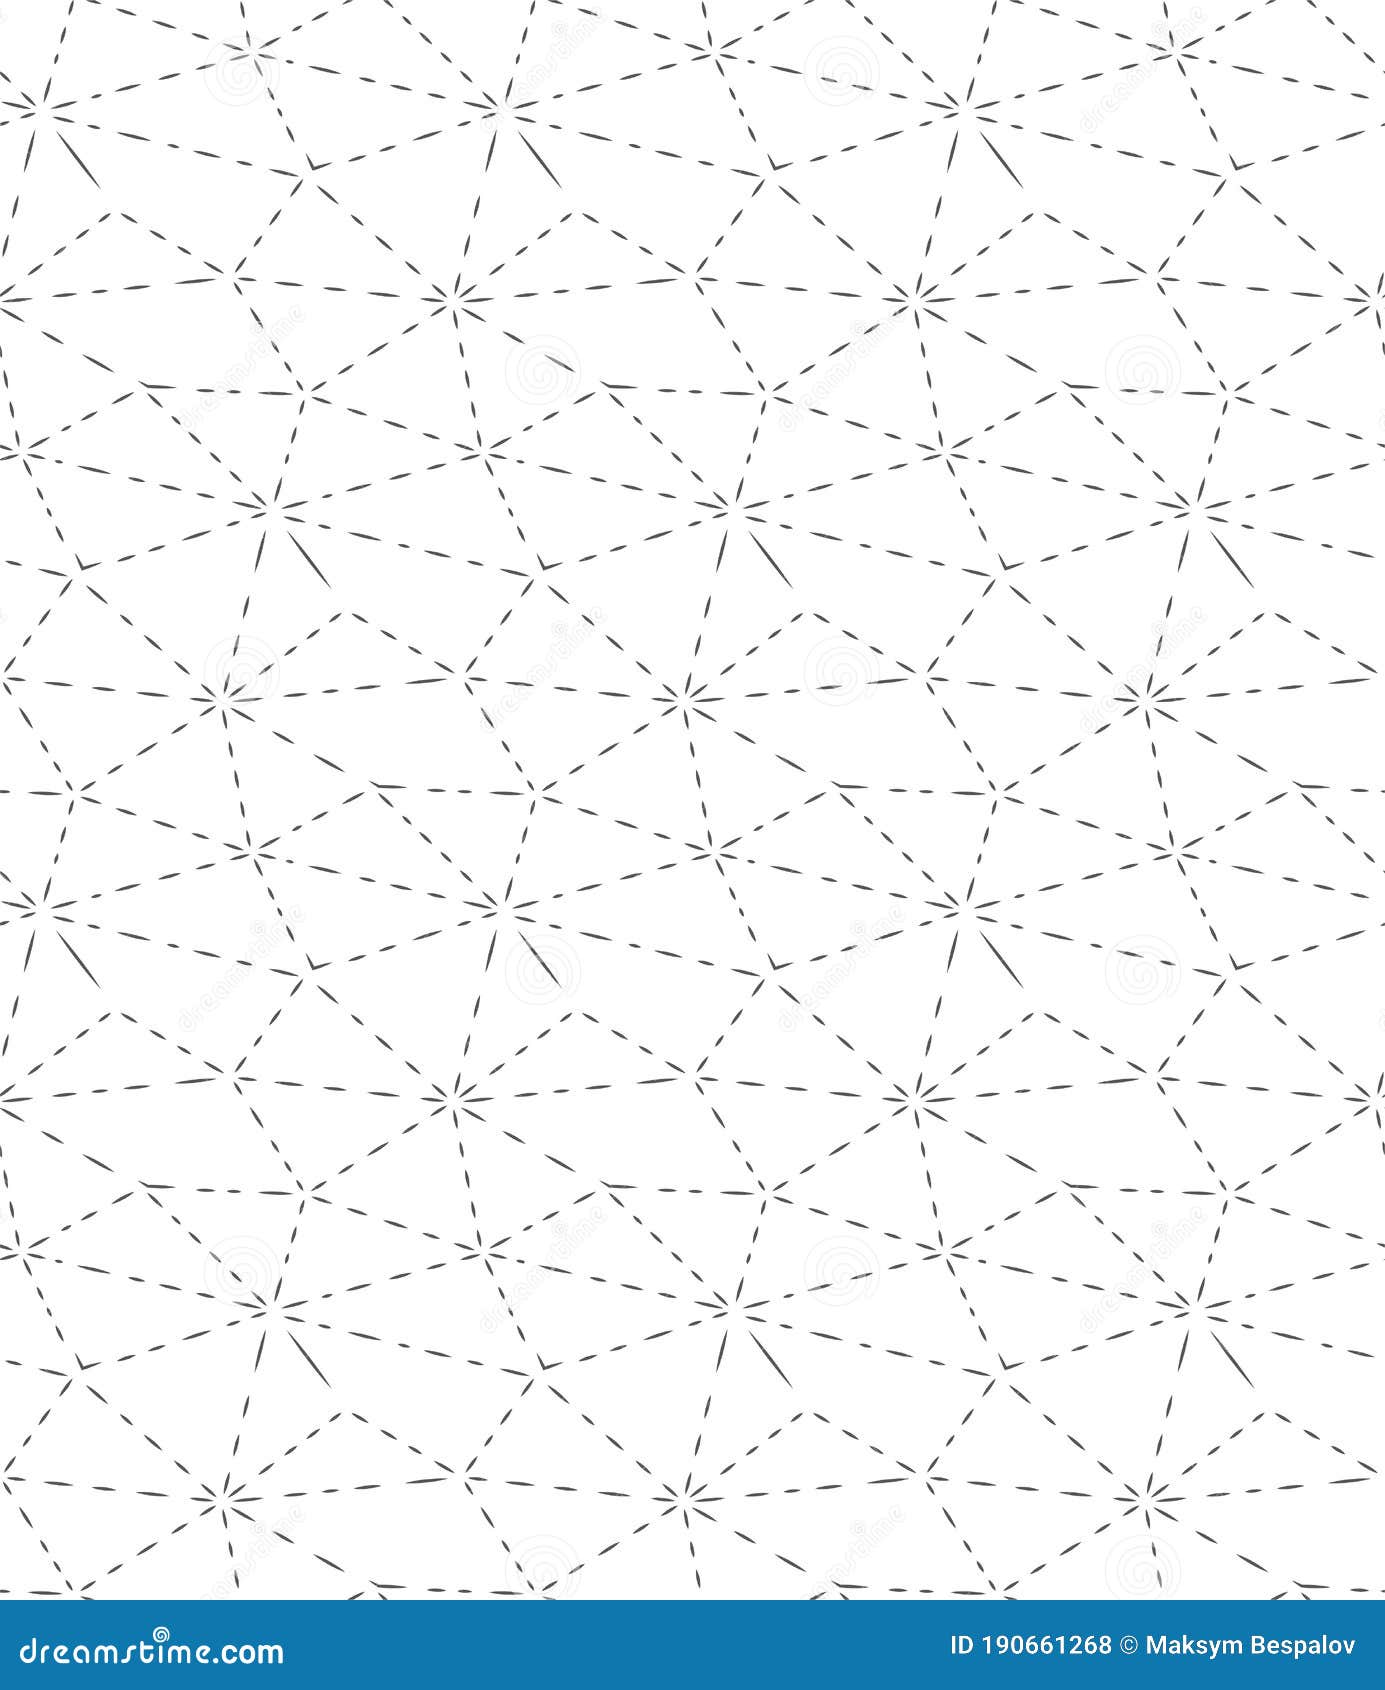 Continuous Vintage Vector Continuous Tile Pattern. Repeat Islamic ...